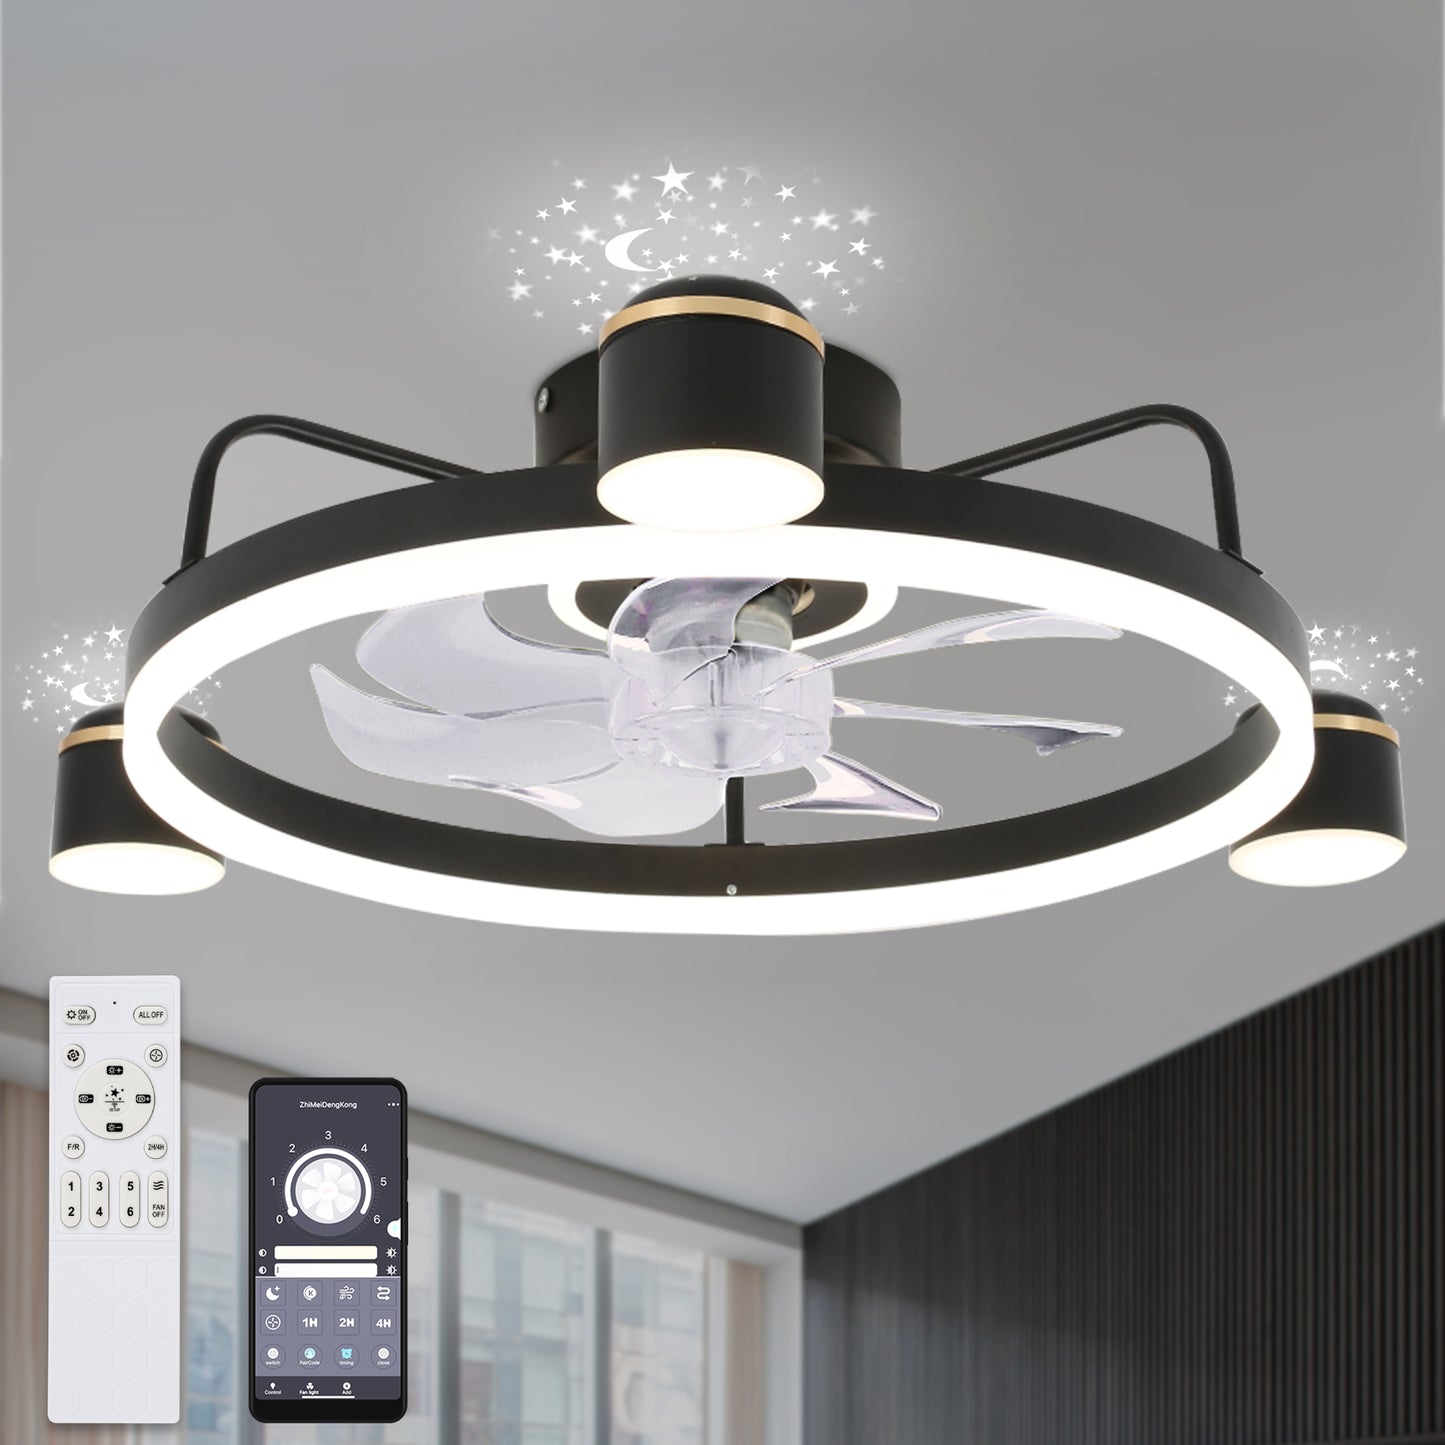 28 in. Starry Night Light Dimmable Ceiling Fan with Light and Remote, Reversible Blades